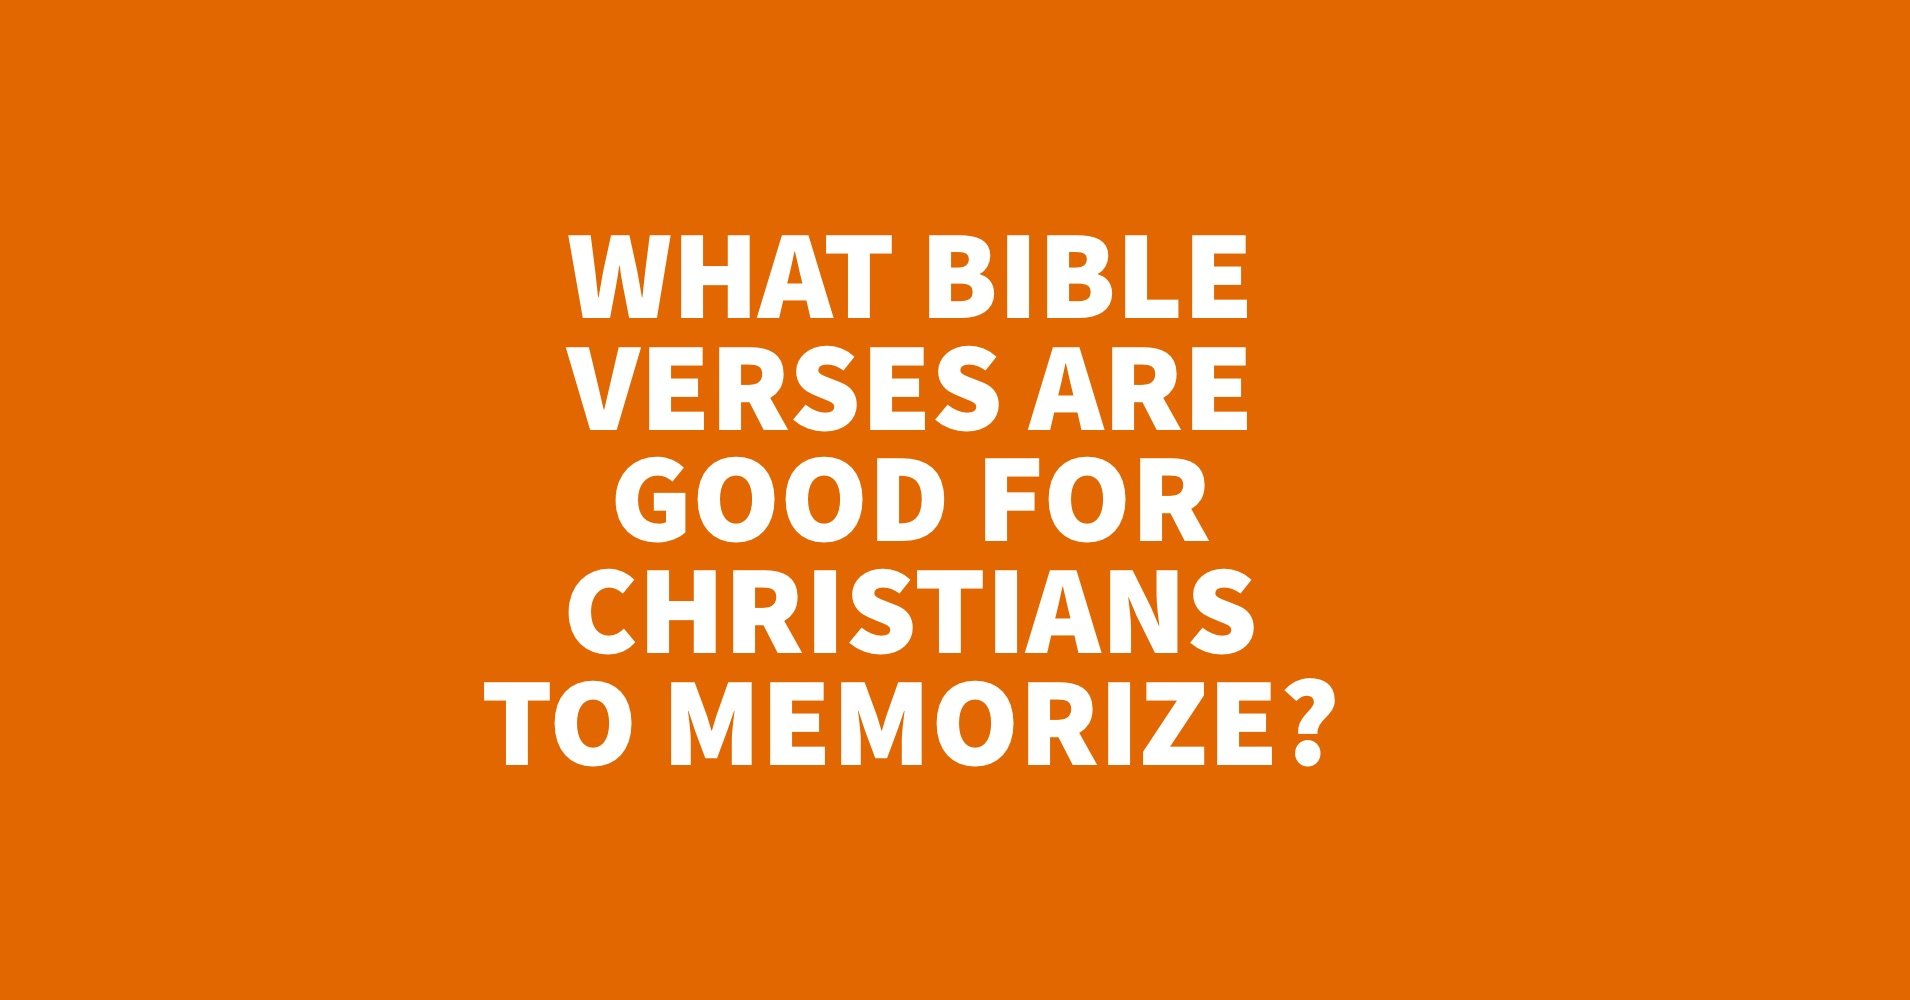 What Bible Verses are Good for Christians to Memorize.jpg